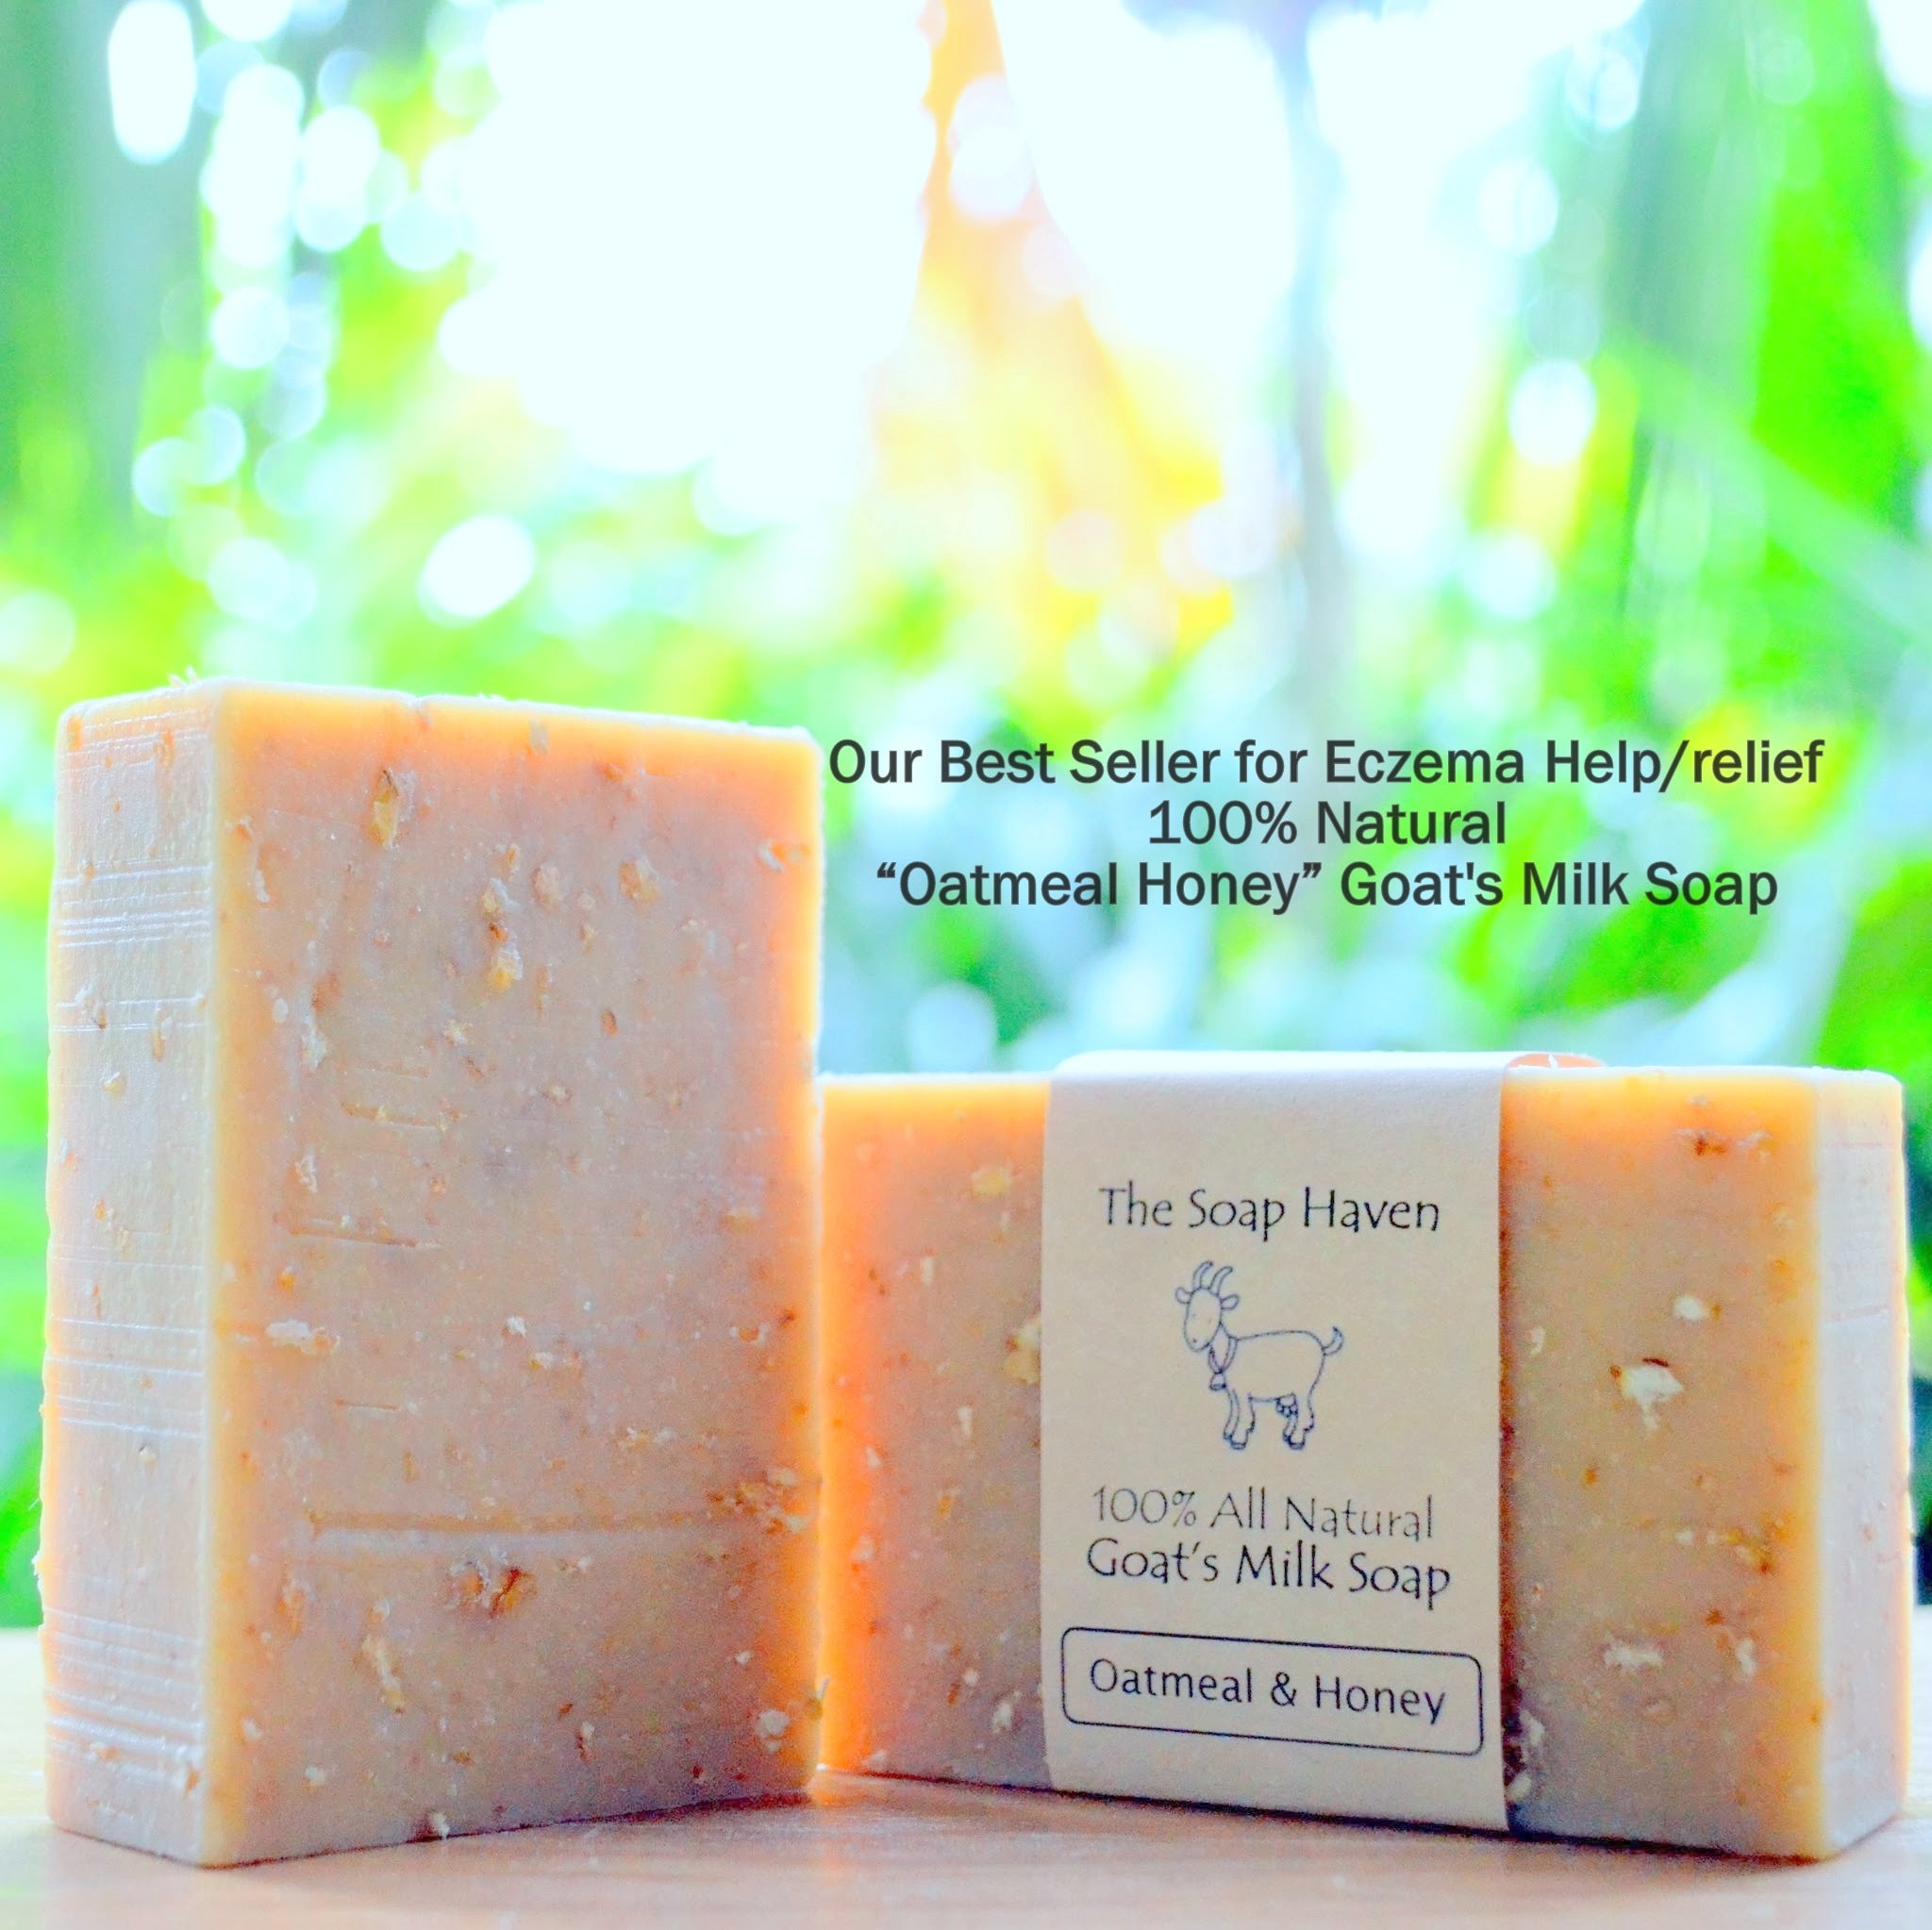 How to cure Eczema - Treatment for Eczema - Oatmeal Honey Goat Milk Soap for Natural home remedy for eczema